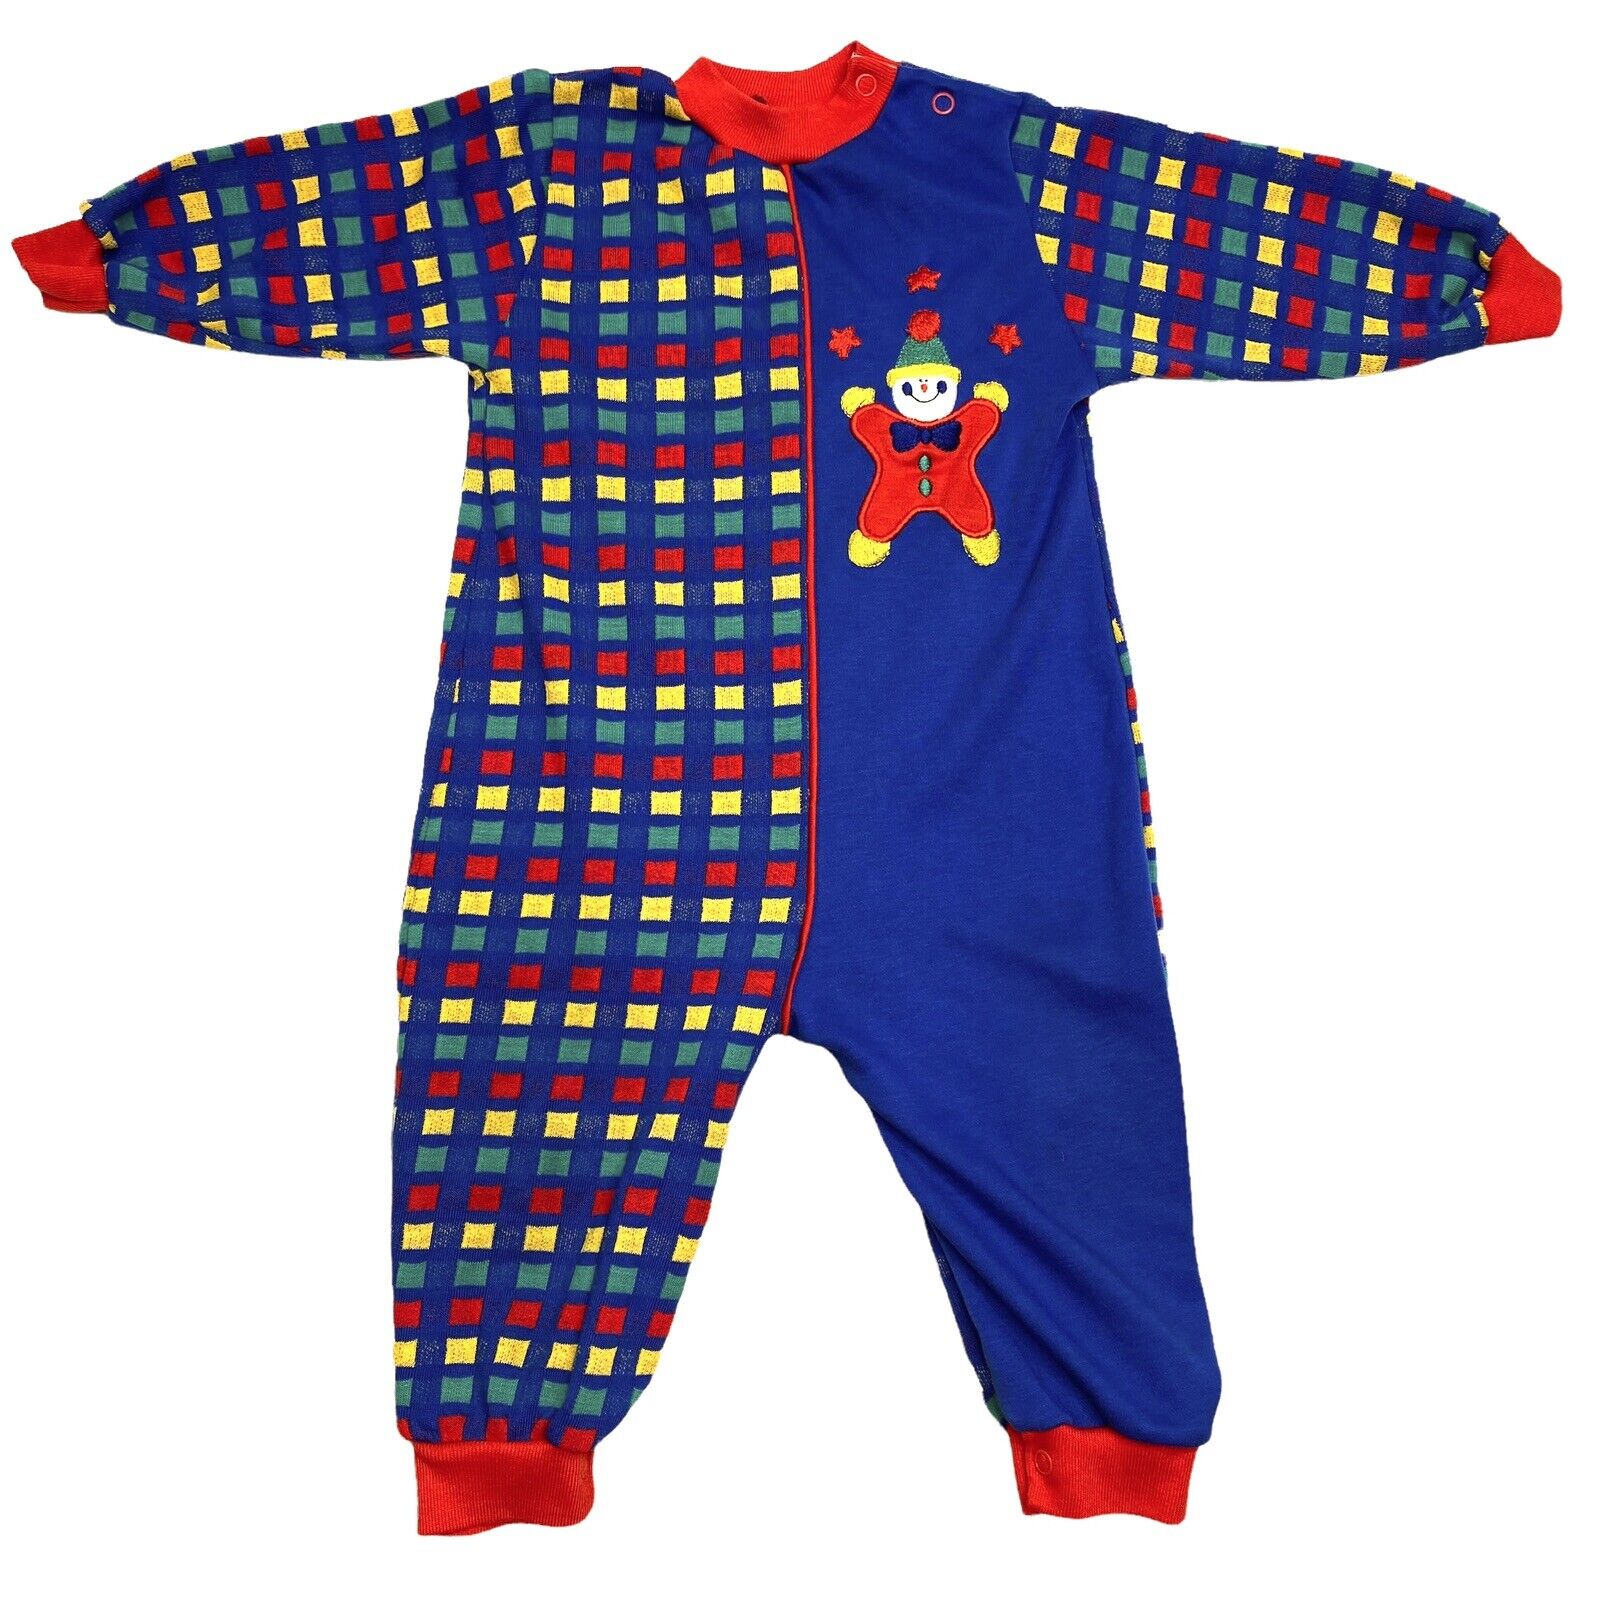 Healthtex Vintage 24 Month Baby Outfit With Clown Colorful One Piece